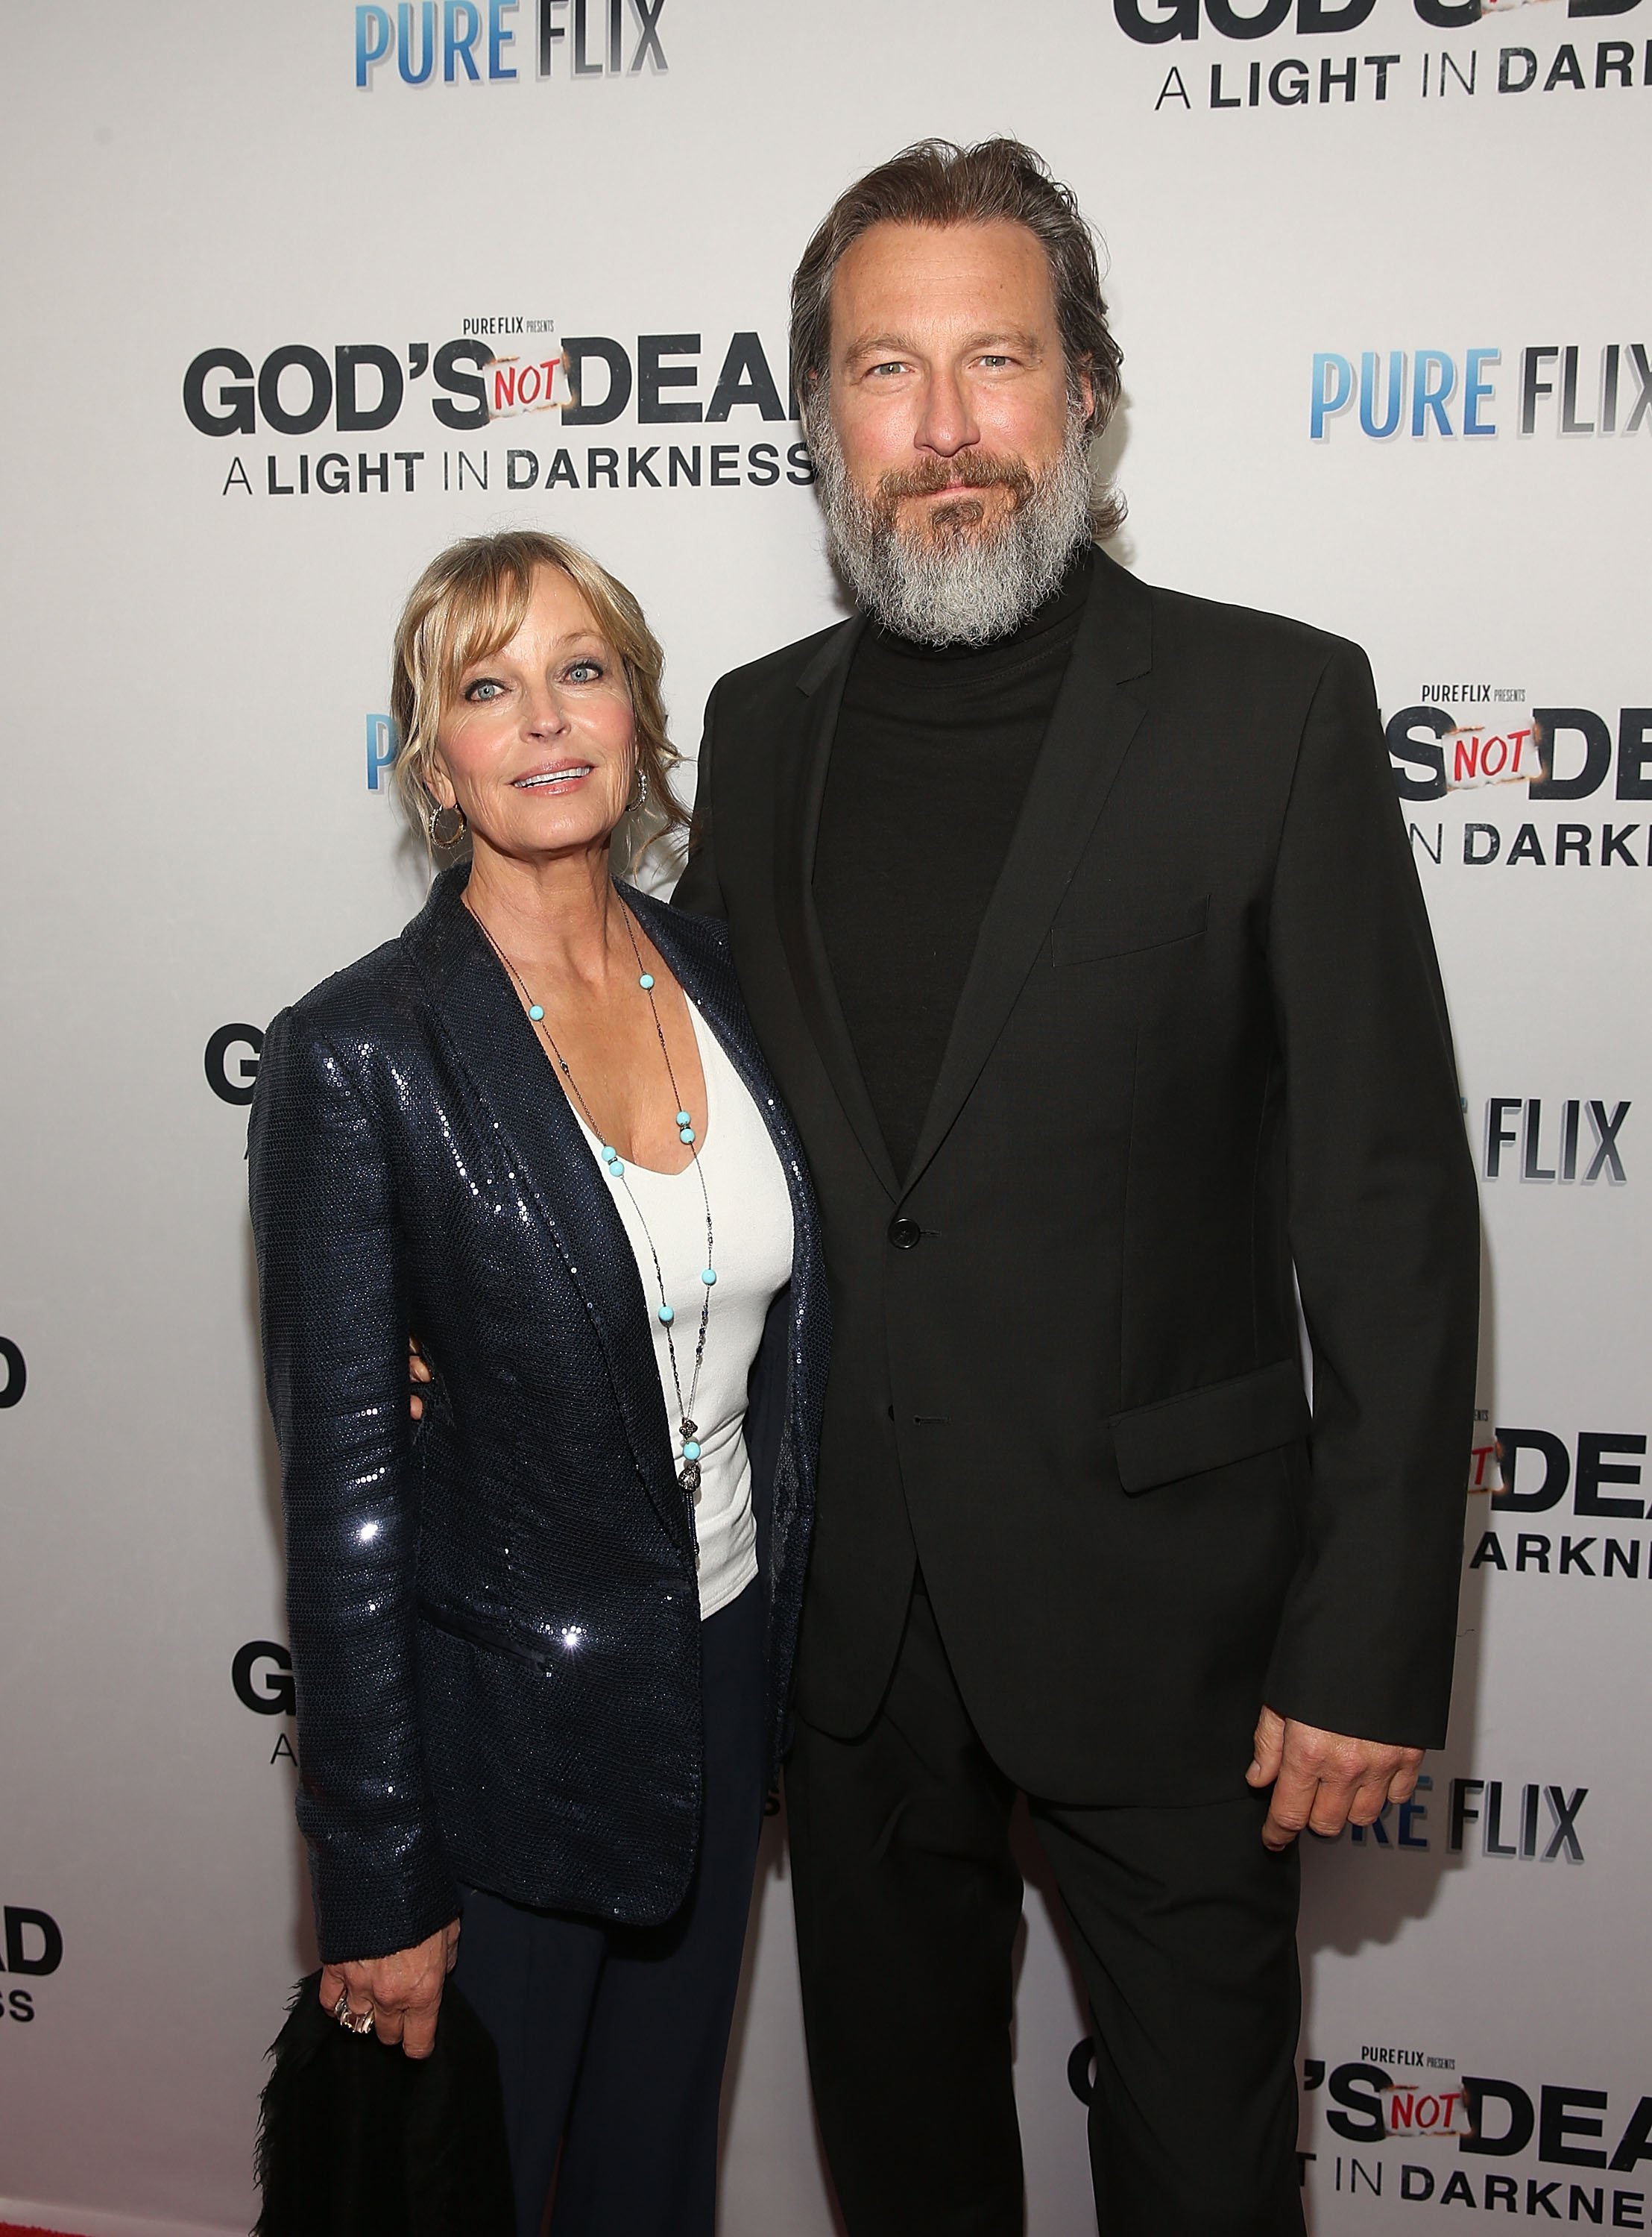 Actors Bo Derek and John Corbett attend the God's Not Dead: A Light in Darkness premiere on March 20, 2018 in Los Angeles, California | Source: Getty Images